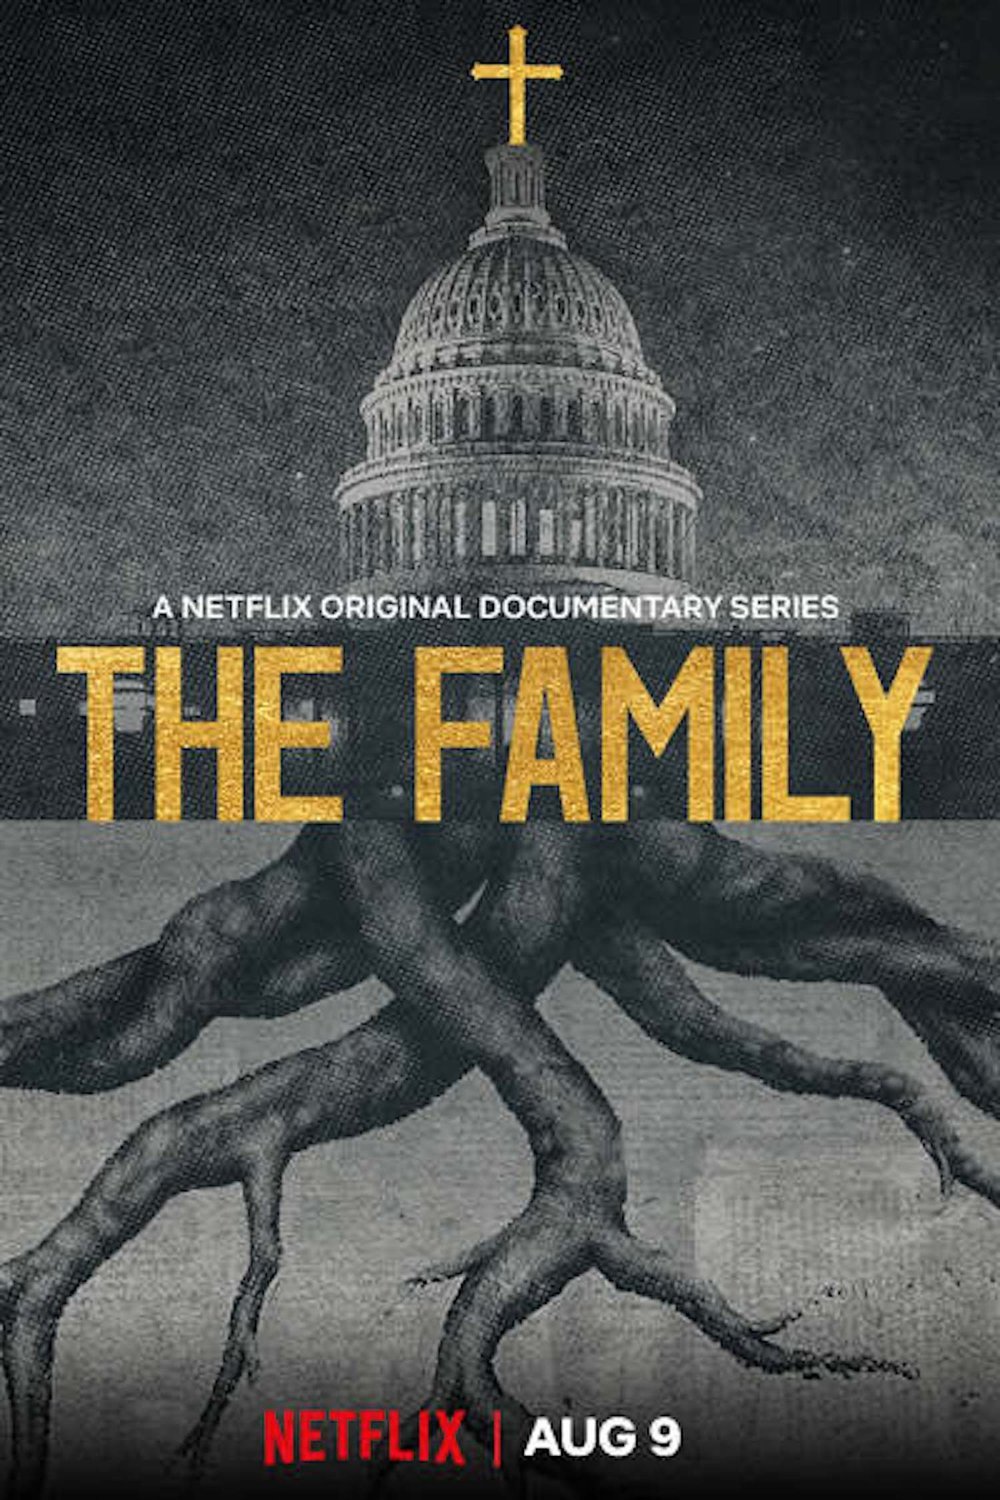 Poster of the movie The Family